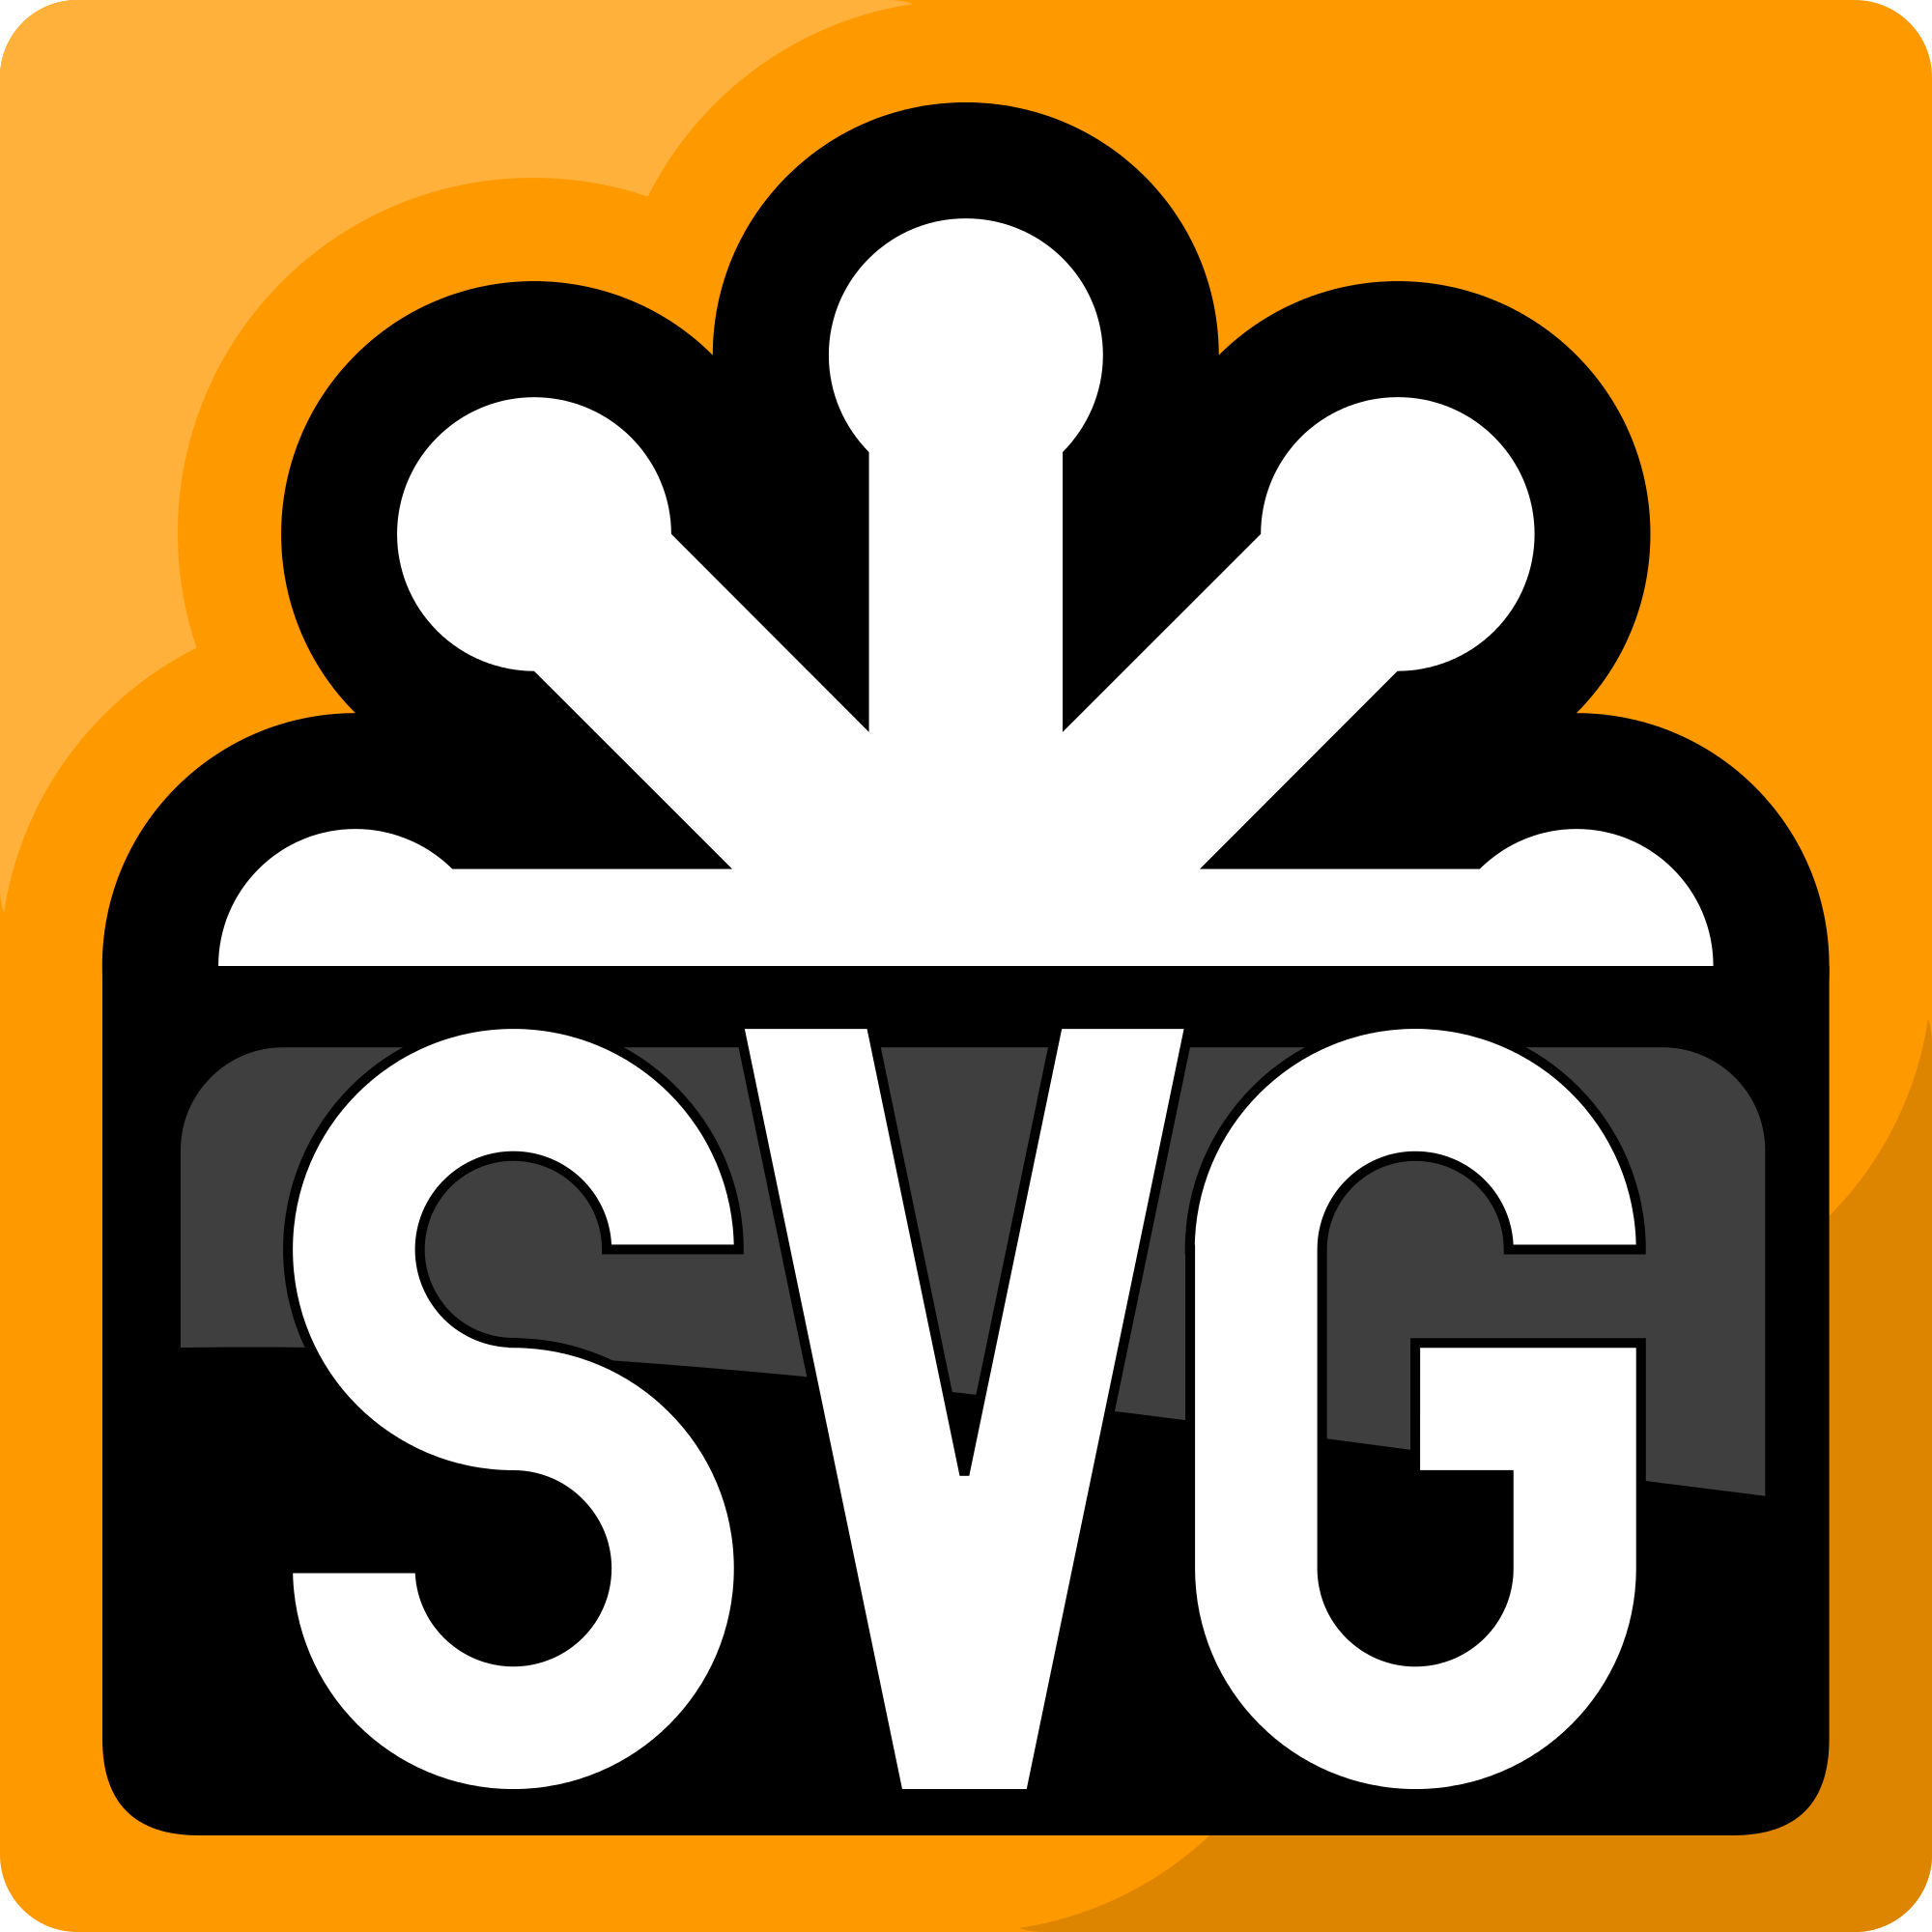 svg clipart library - photo #6